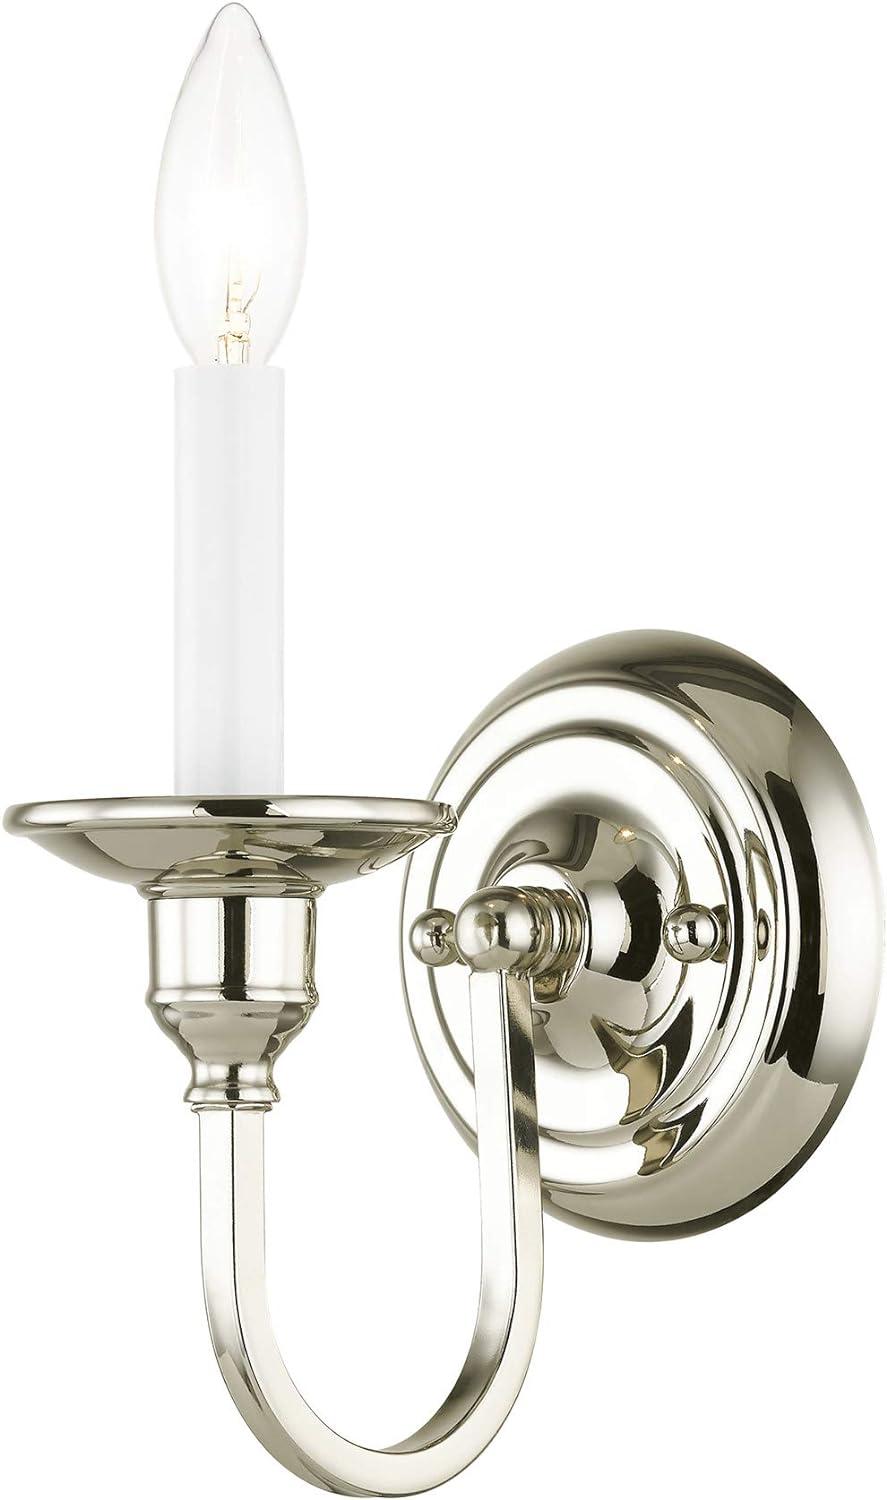 Cranford Polished Nickel Squared Arm 1-Light Wall Sconce